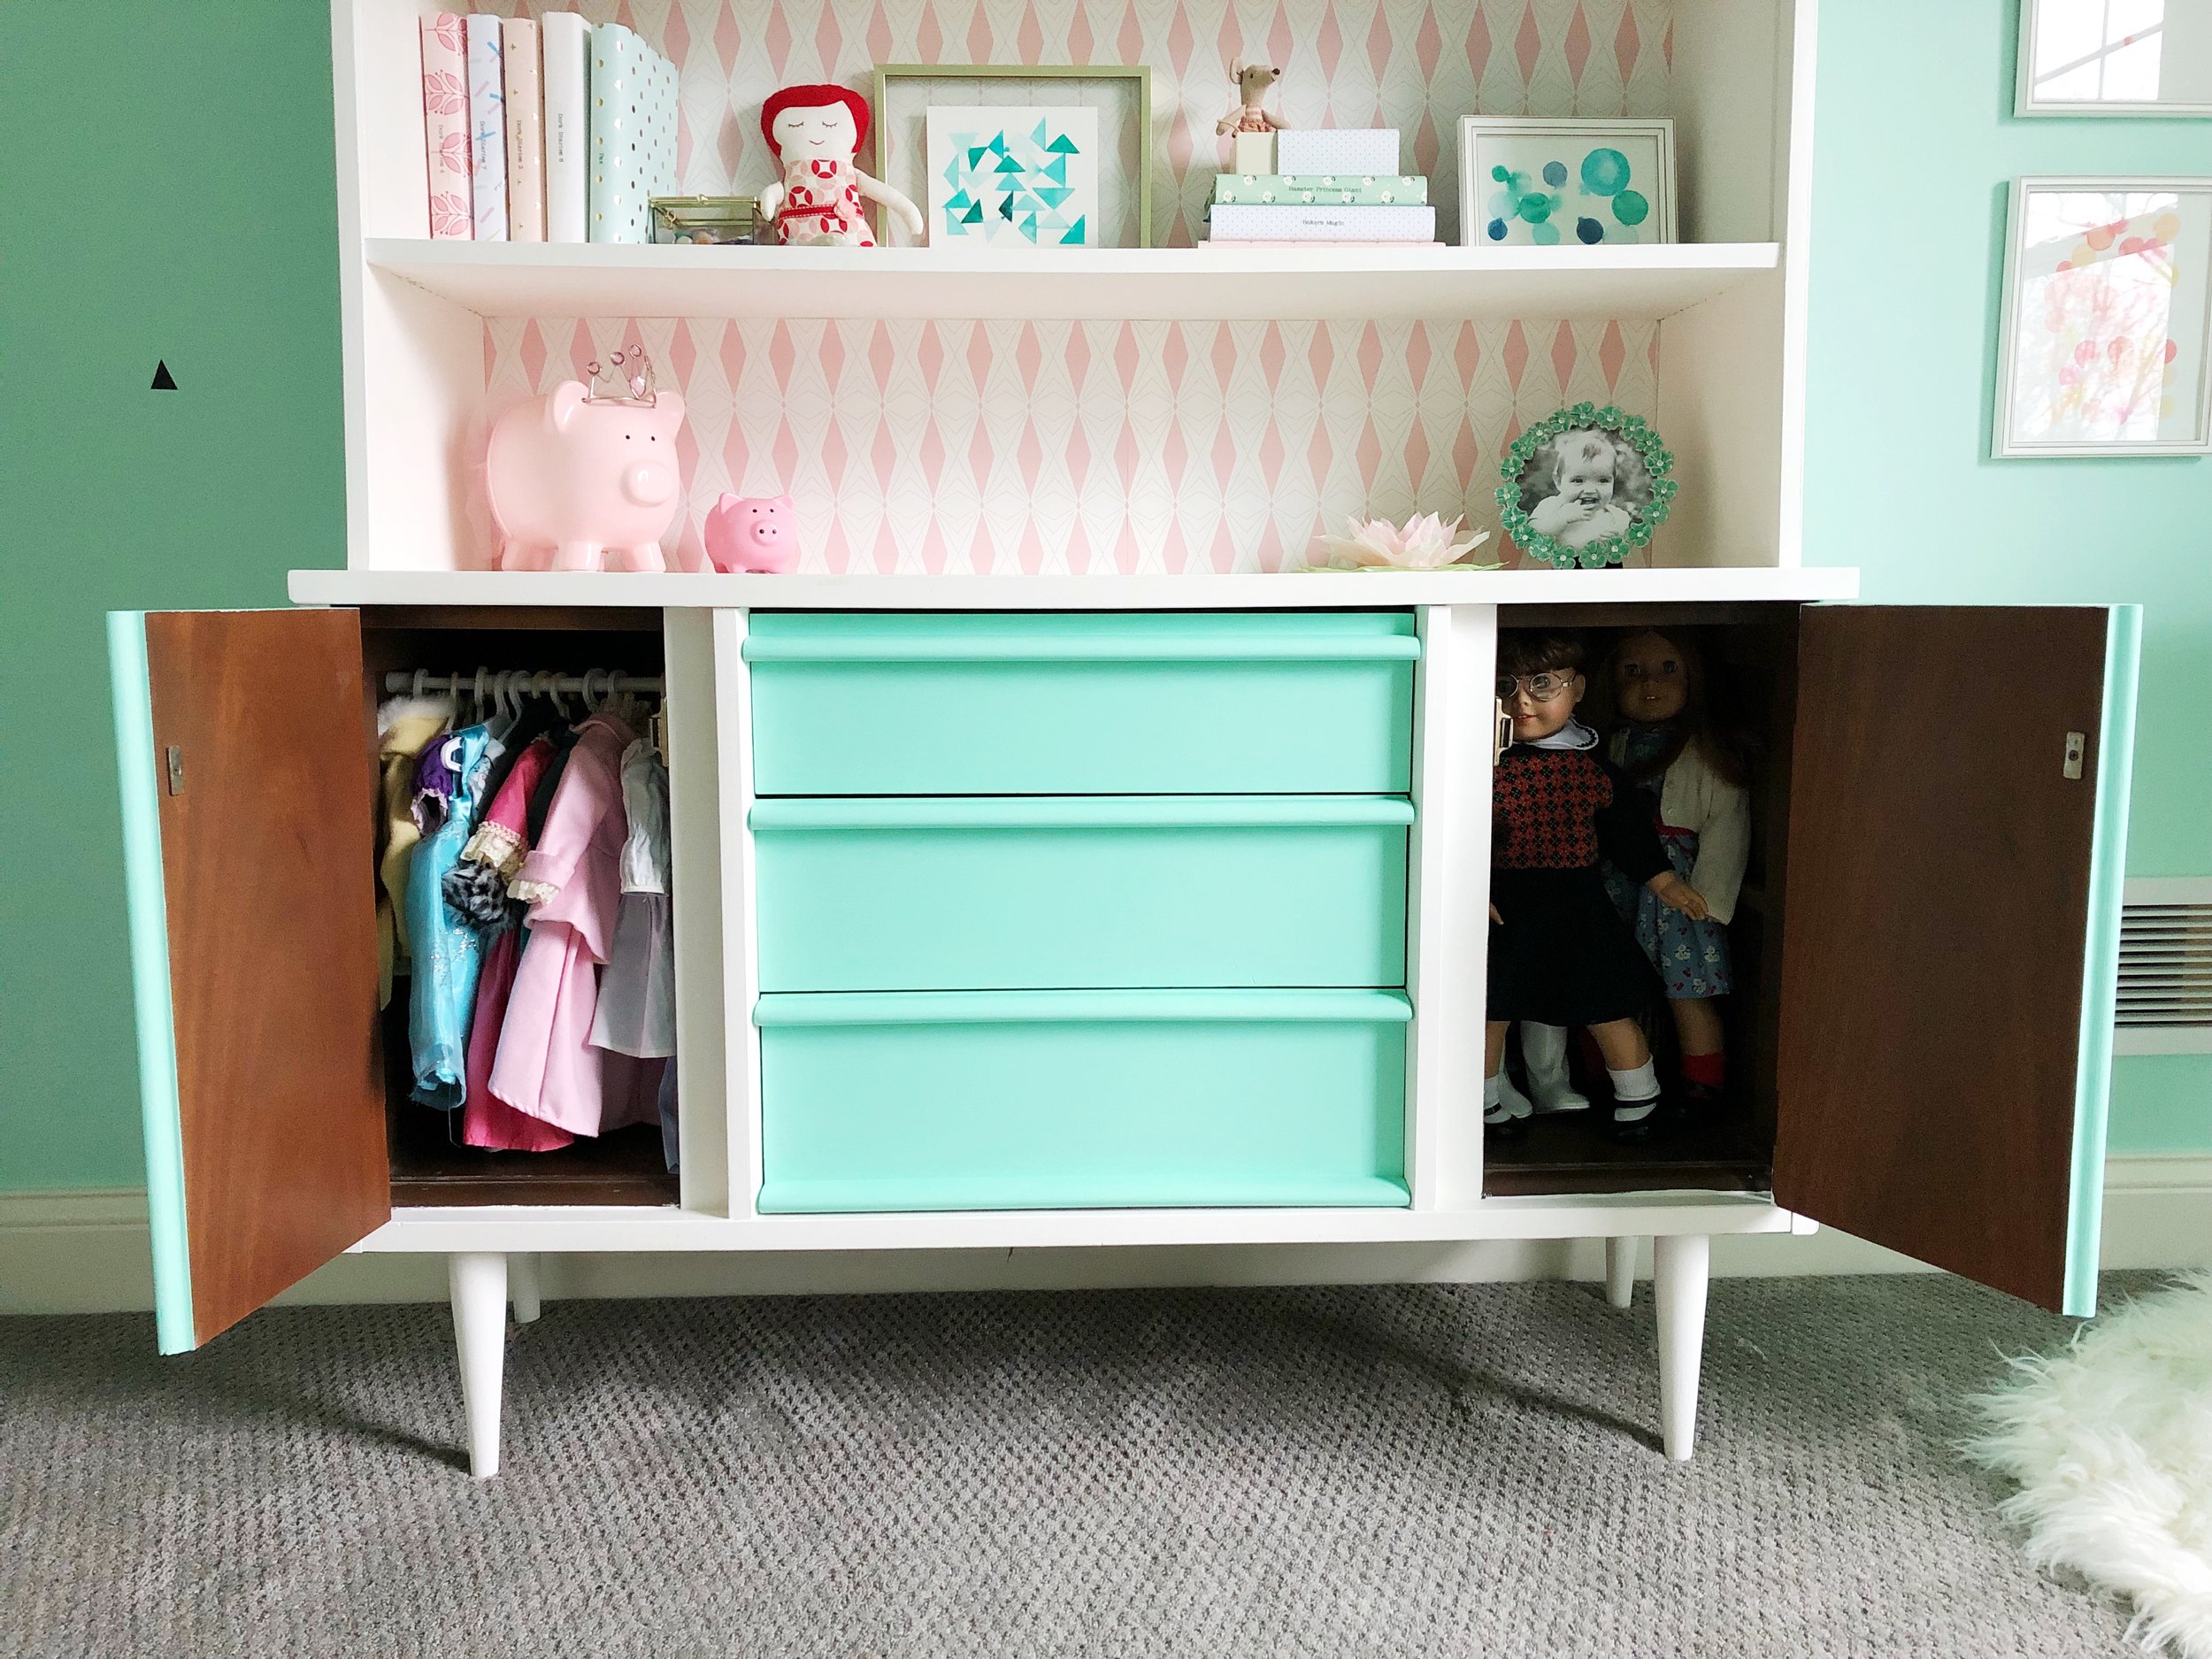 American Girl Doll Storage Solution in Mid Century Hutch.